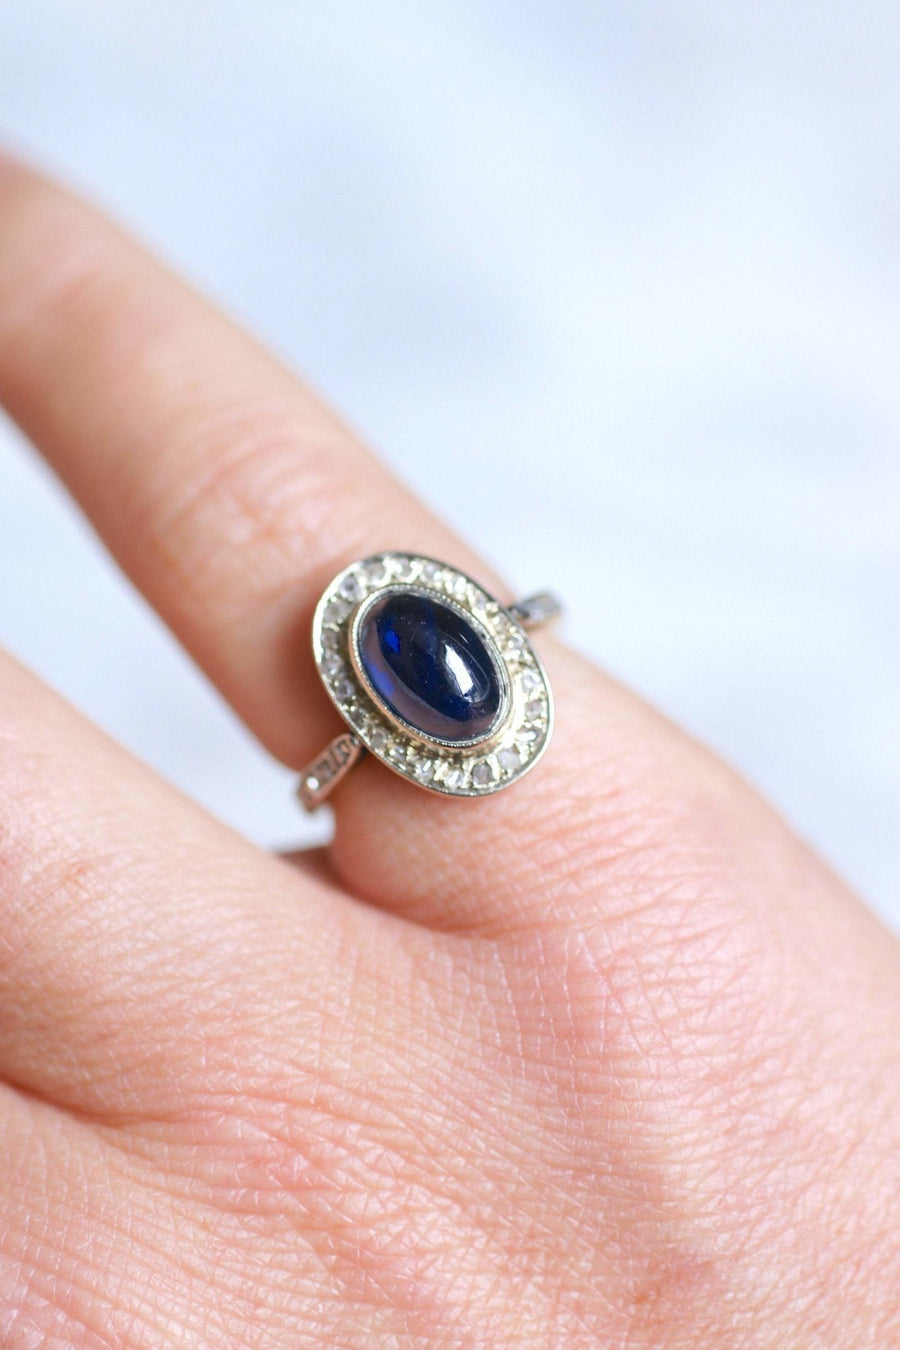 Belle Epoque sapphire cabochon ring 3.50 Cts surrounded by diamonds on gold - Galerie Pénélope